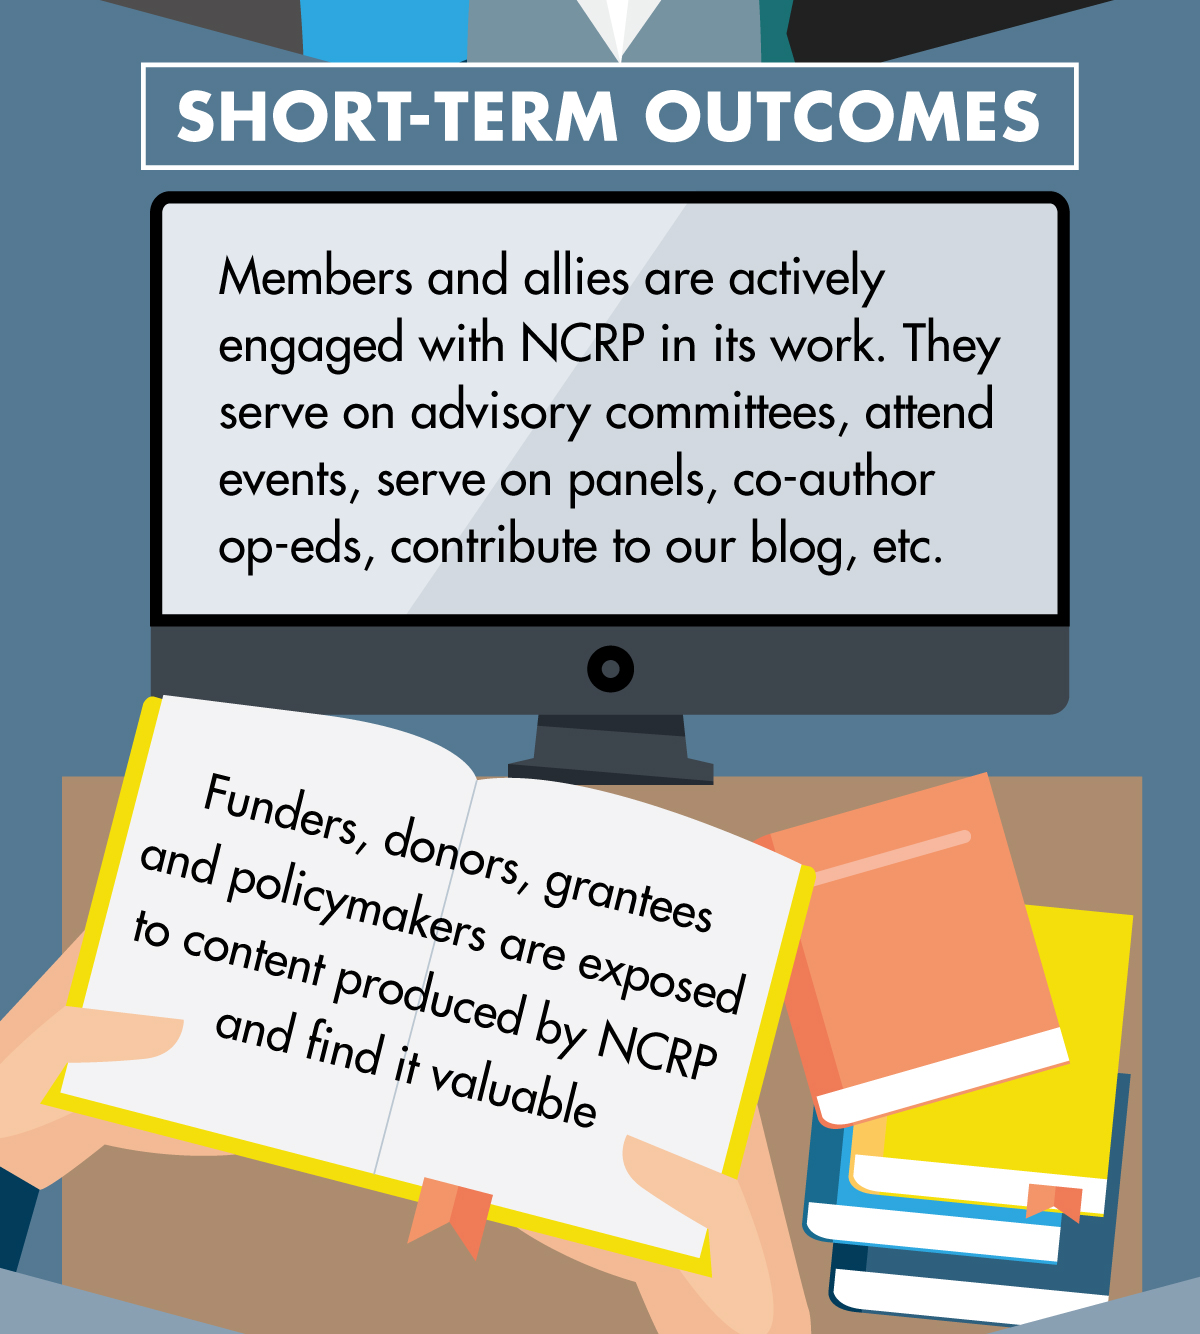 Our desired short-term outcomes are two-fold. First, funders, donors, grantees and policymakers are exposed to content produced by NCRP and find it valuable. Second, members and allies are actively engaged with NCRP in its work. They serve on advisory committees, attend events, serve on panels co-author op-eds, contribute to our blog, etc.There are three desired mid-term outcomes. First, funders and donors use NCRP content and/or relationships to inform and improve how they operate and/or how they allocate resources. Second, grantees working for social justice, especially NCRP members, use NCRP content and/or relationships to strengthen their fundraising. They feel more empowered in their relationships with funders. Third, policymakers use NCRP content to inform their decisions.